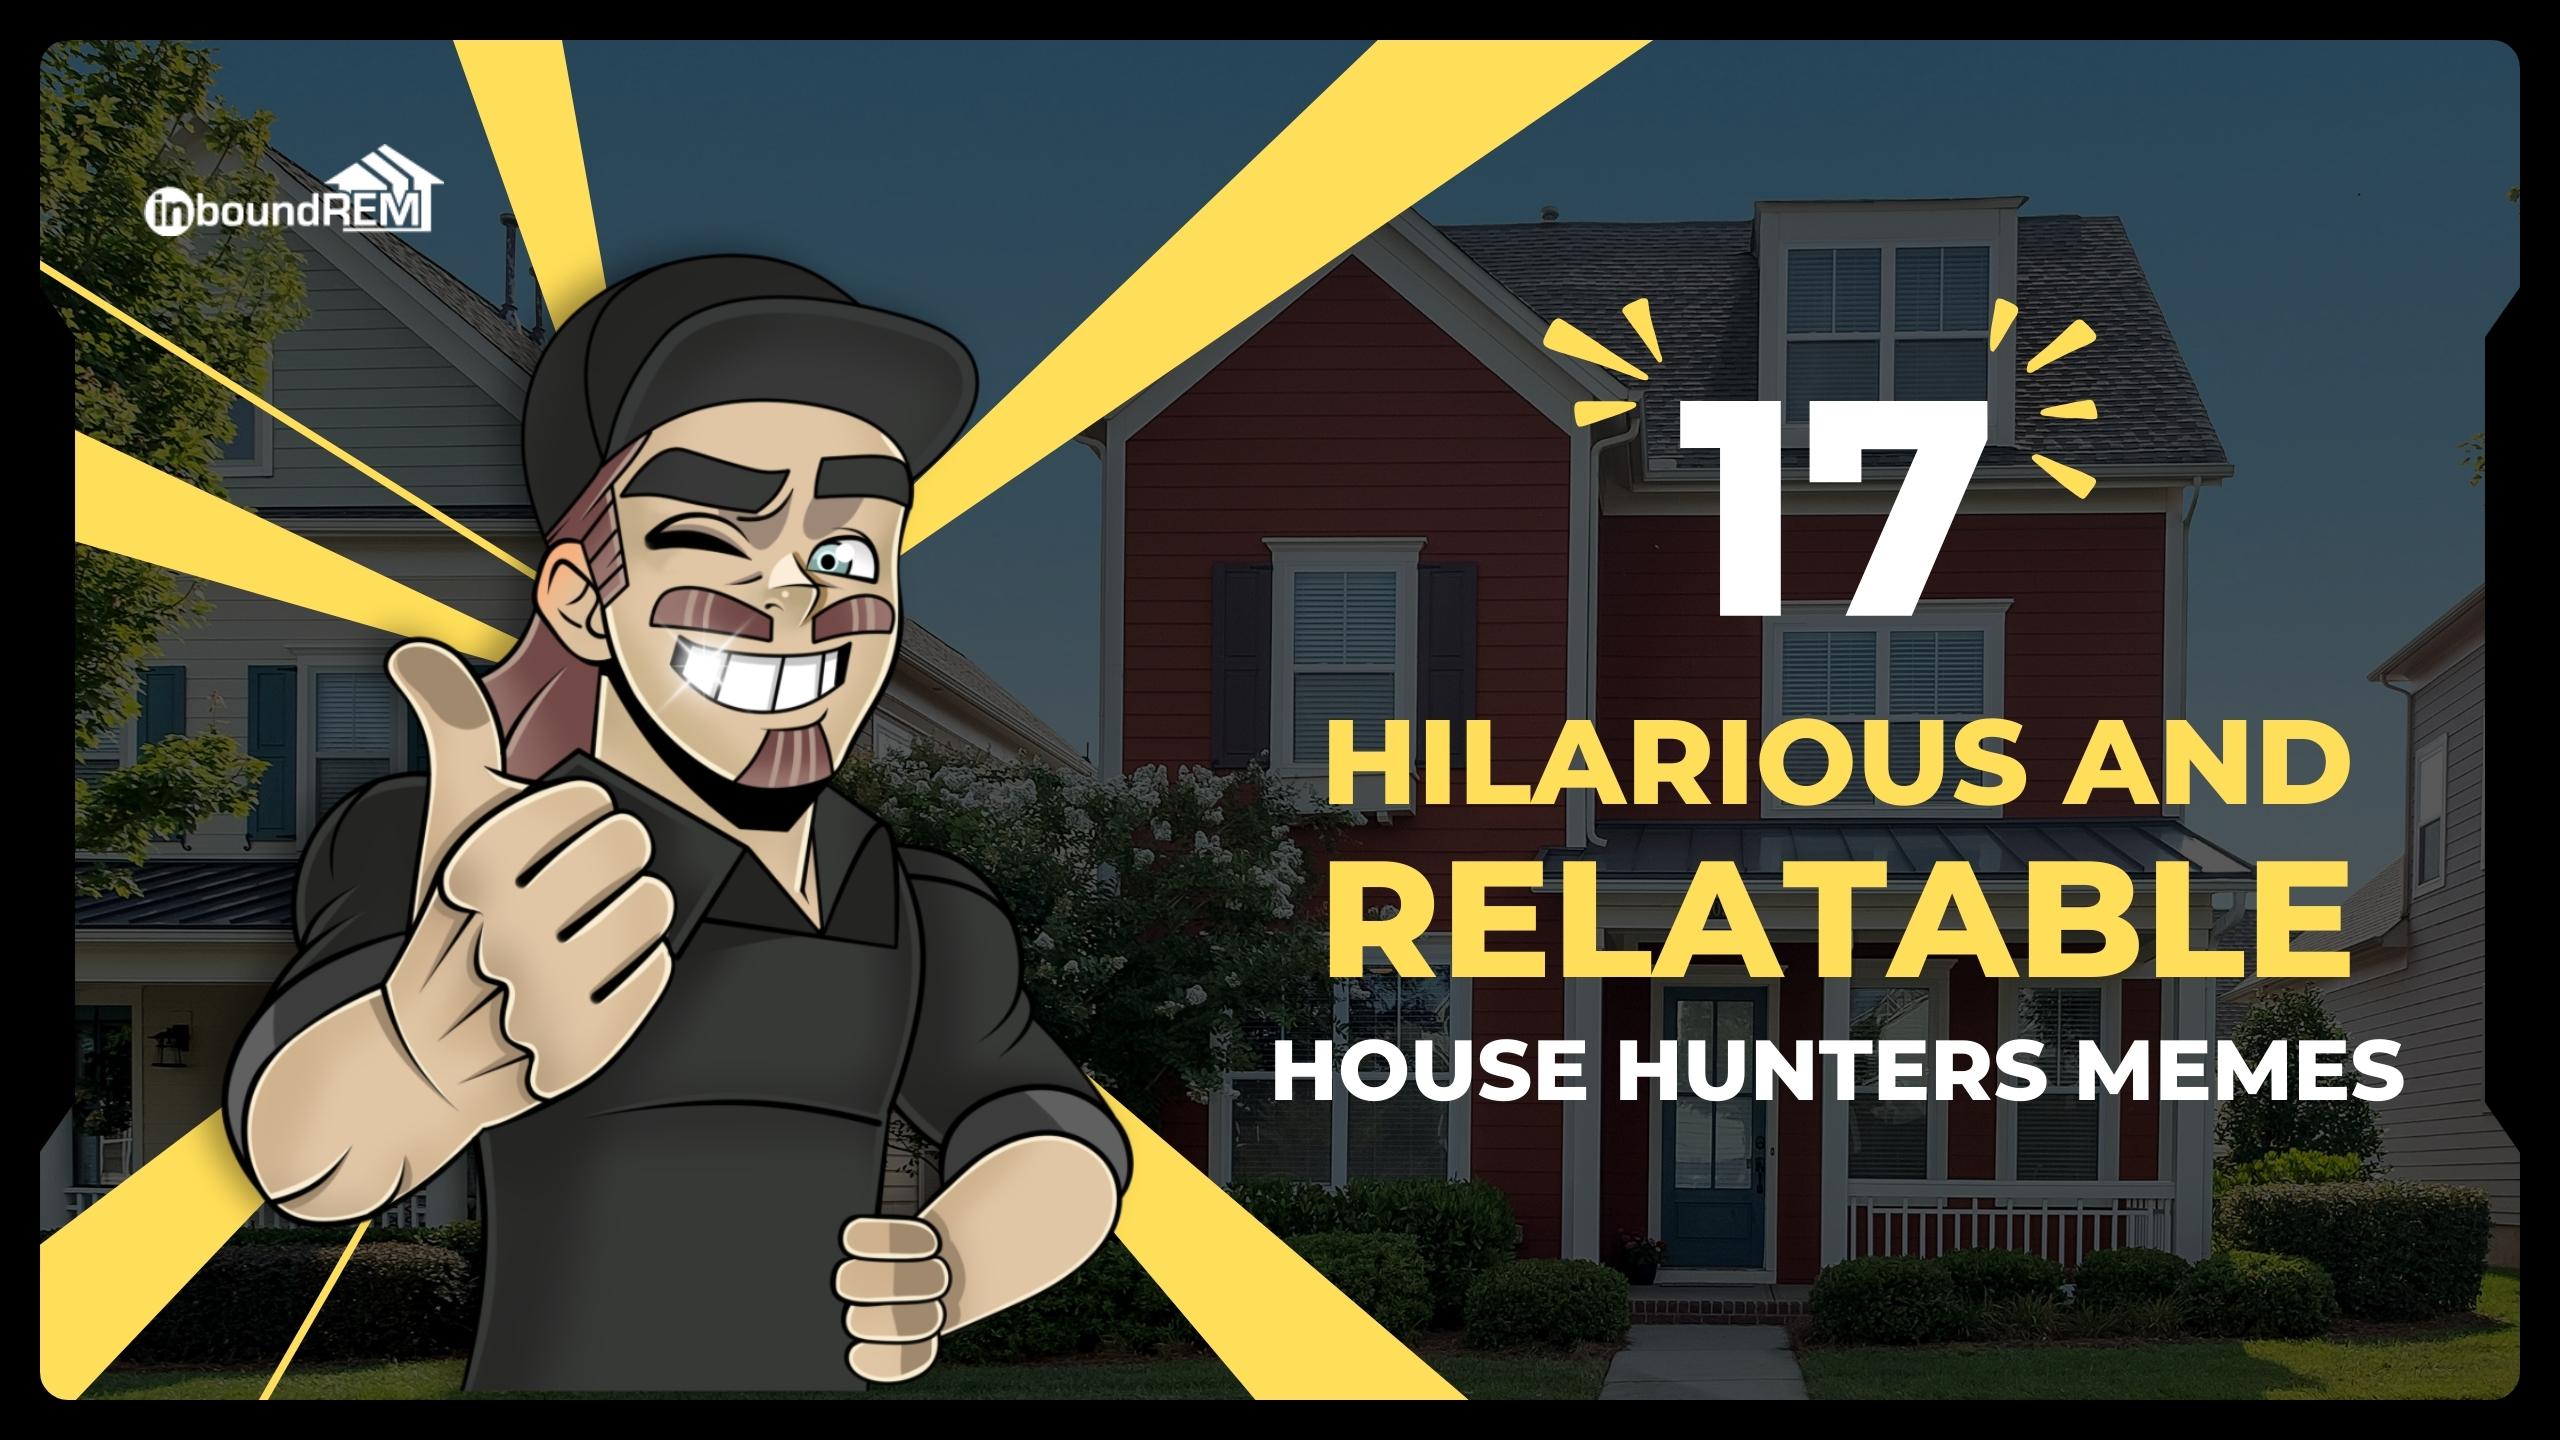 Featured image for the 17 Hilarious and Relatable House Hunters Memes blog post